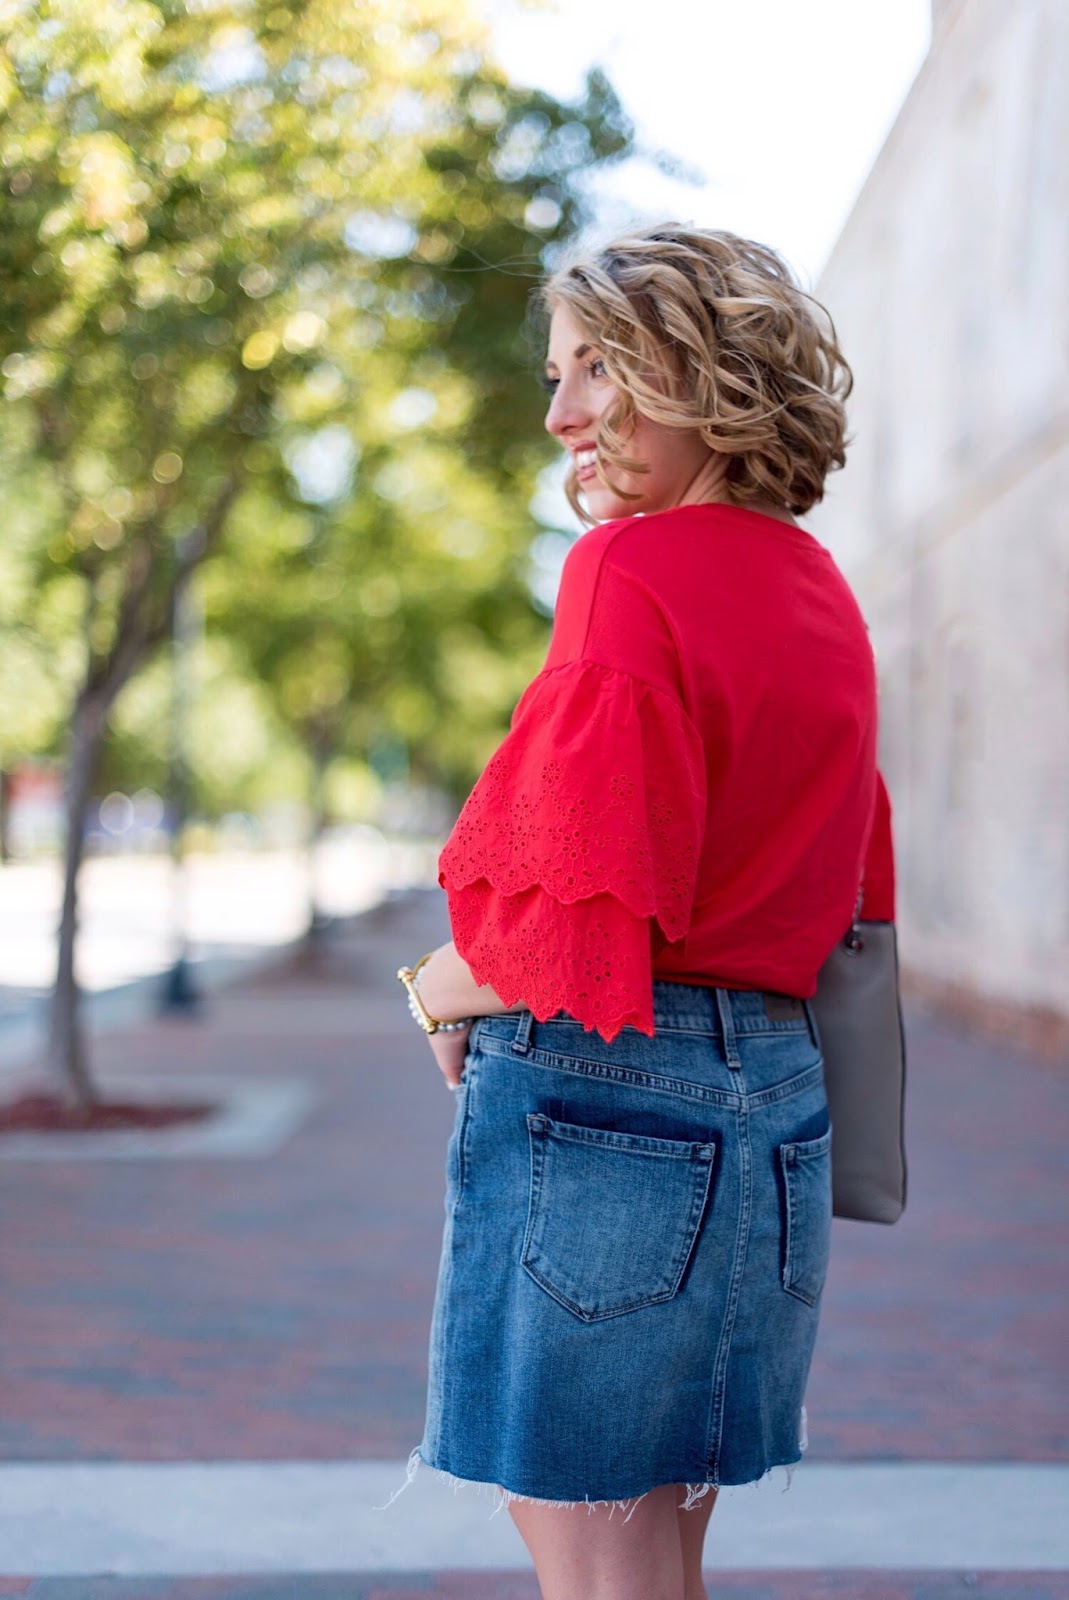 Eyelet Ruffle Sleeve T-Shirt - Click through to see more on Something Delightful Blog!